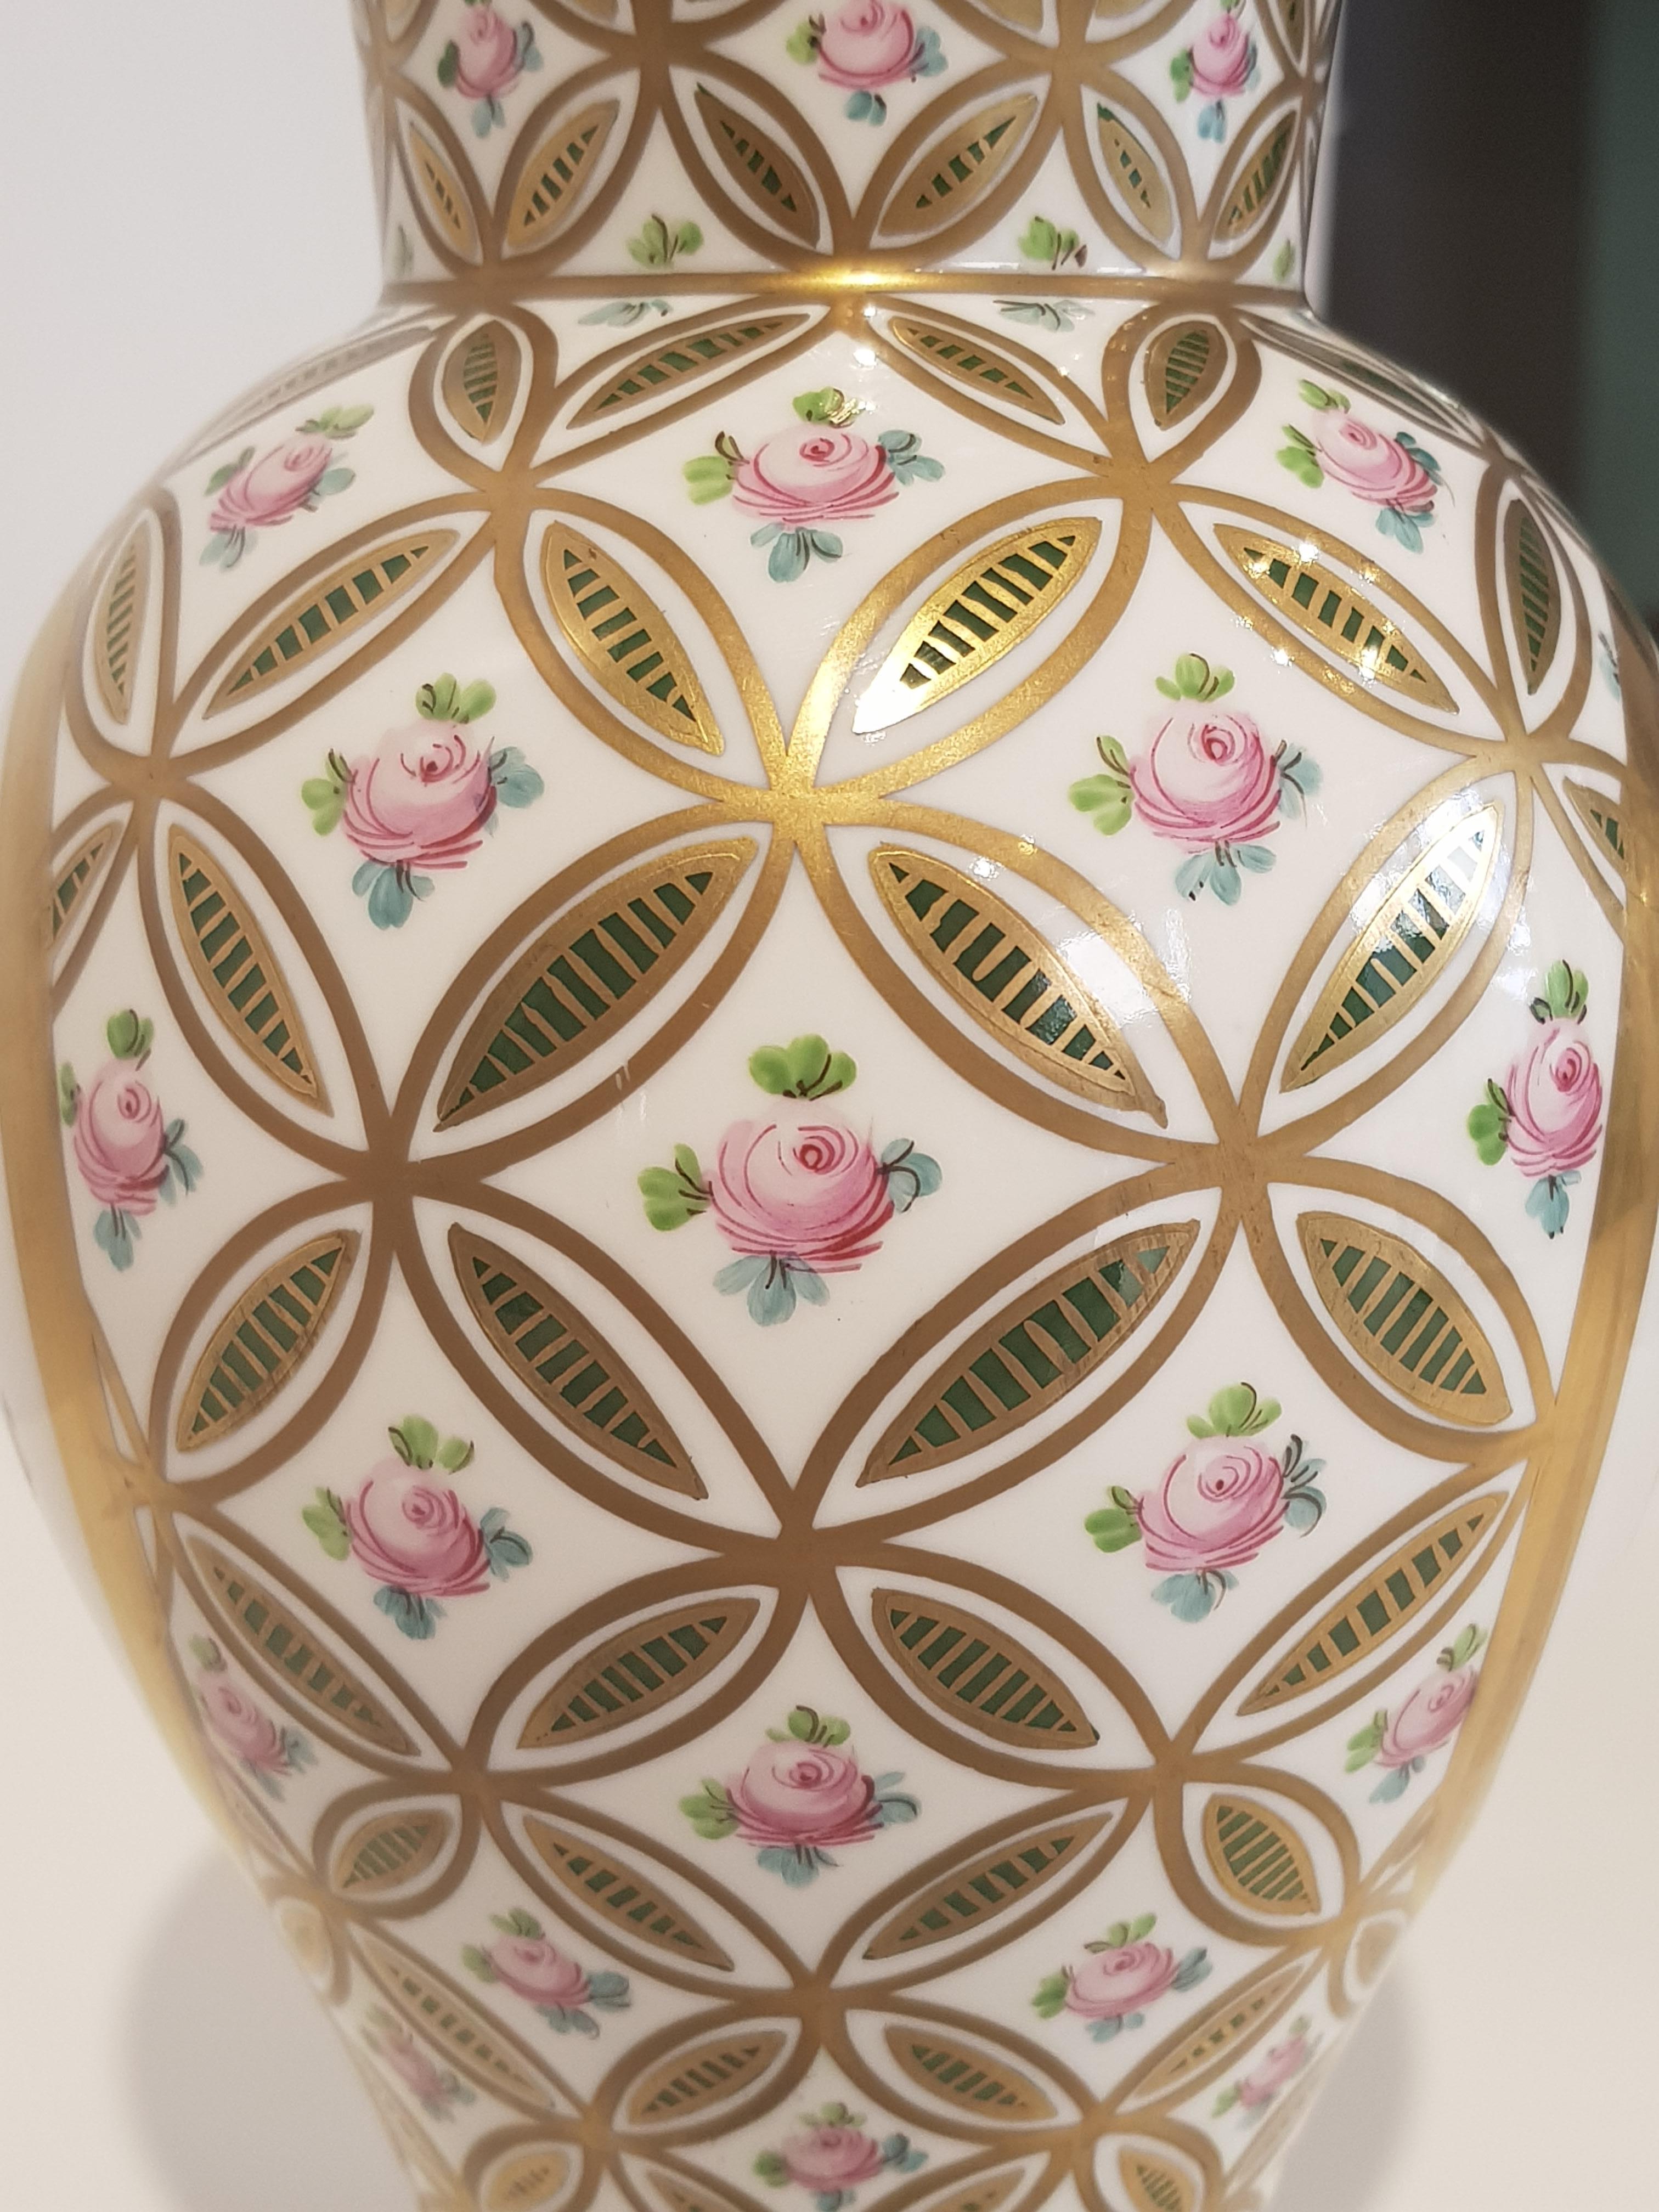 White and pure gold porcelain vases decorated with flowers 1970s Dresden  In Good Condition For Sale In Monza, IT